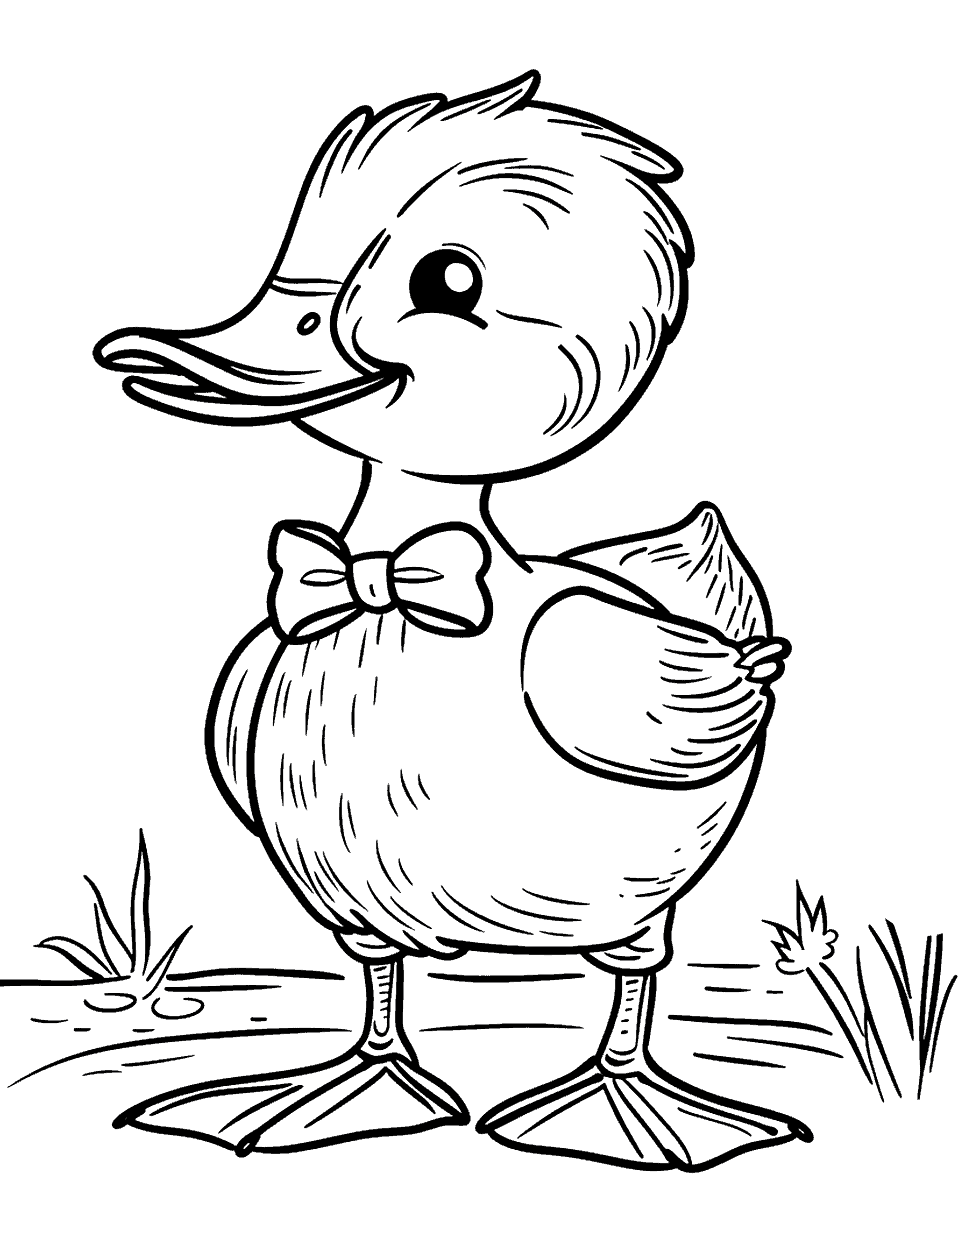 Duck Wearing a Bow Tie Coloring Page - A fancy duck dressed up with a bow tie, looking dapper and ready for a special occasion.